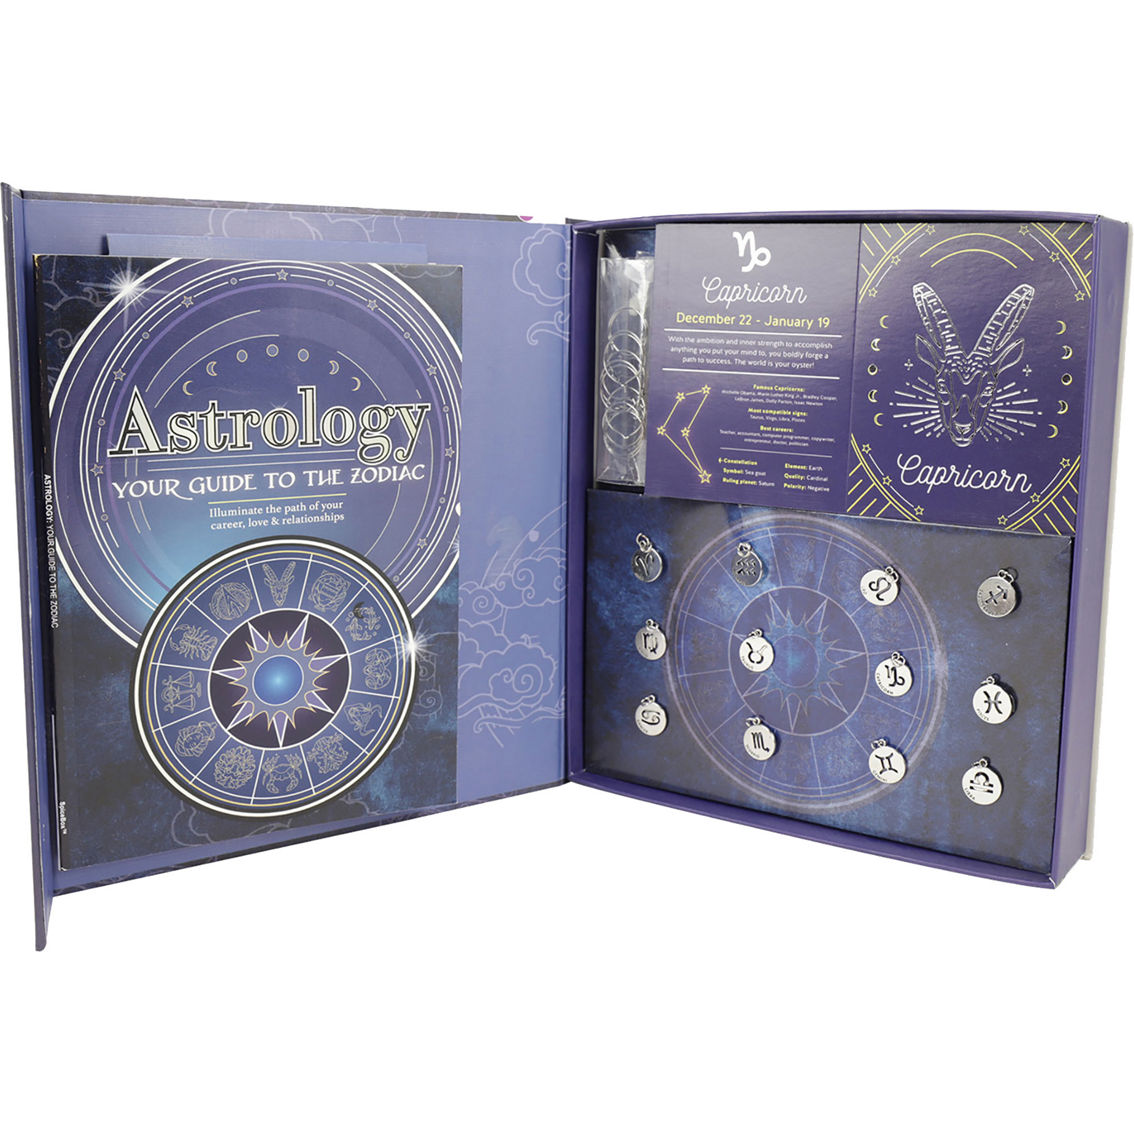 SpiceBox Gift Box: Astrology - Image 3 of 6